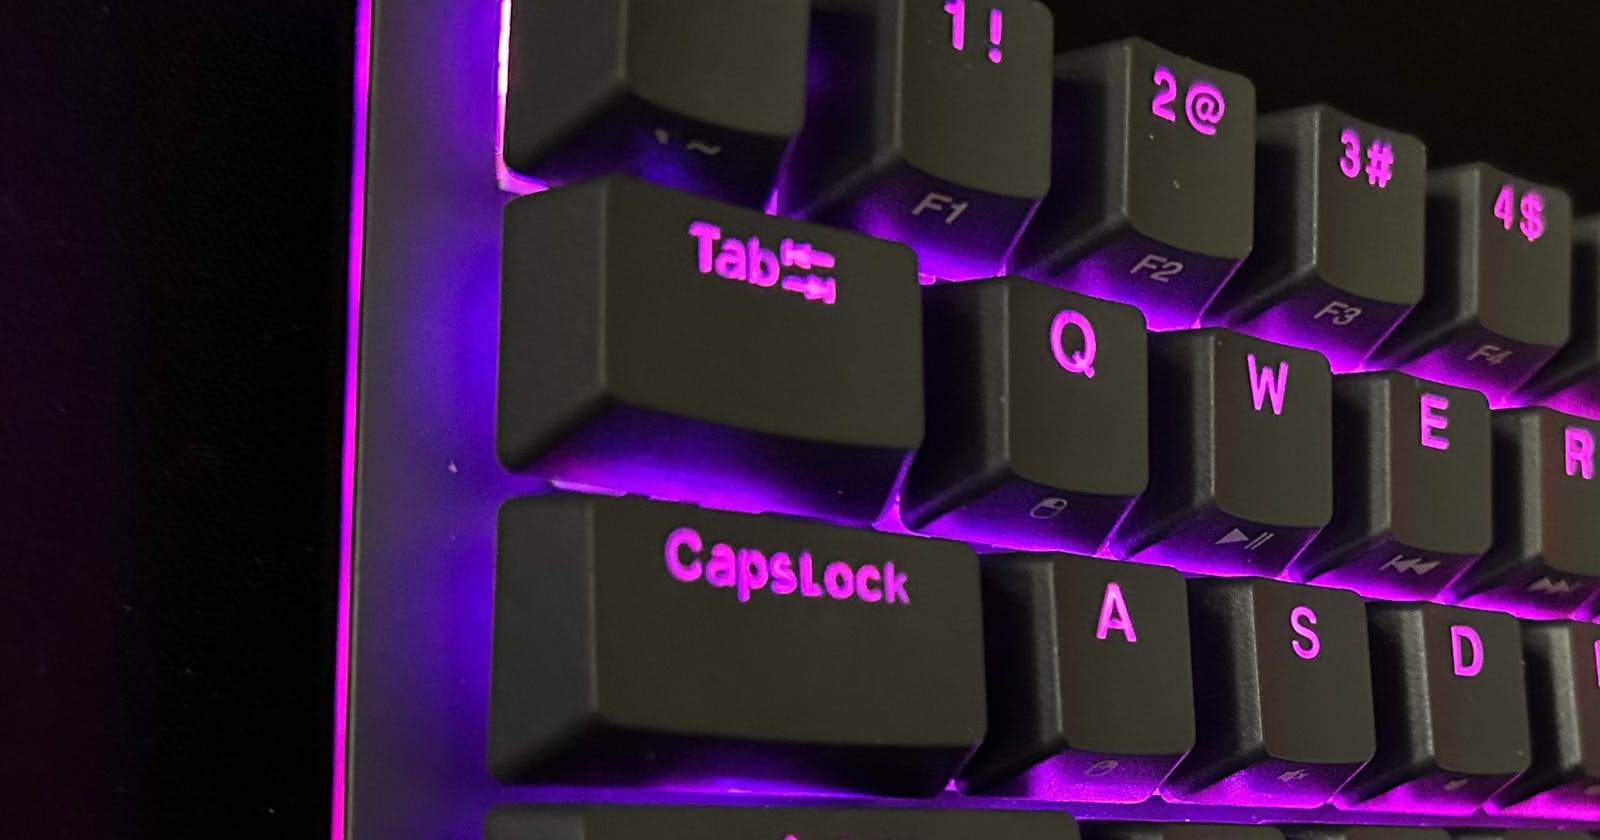 The Ideal Keyboard